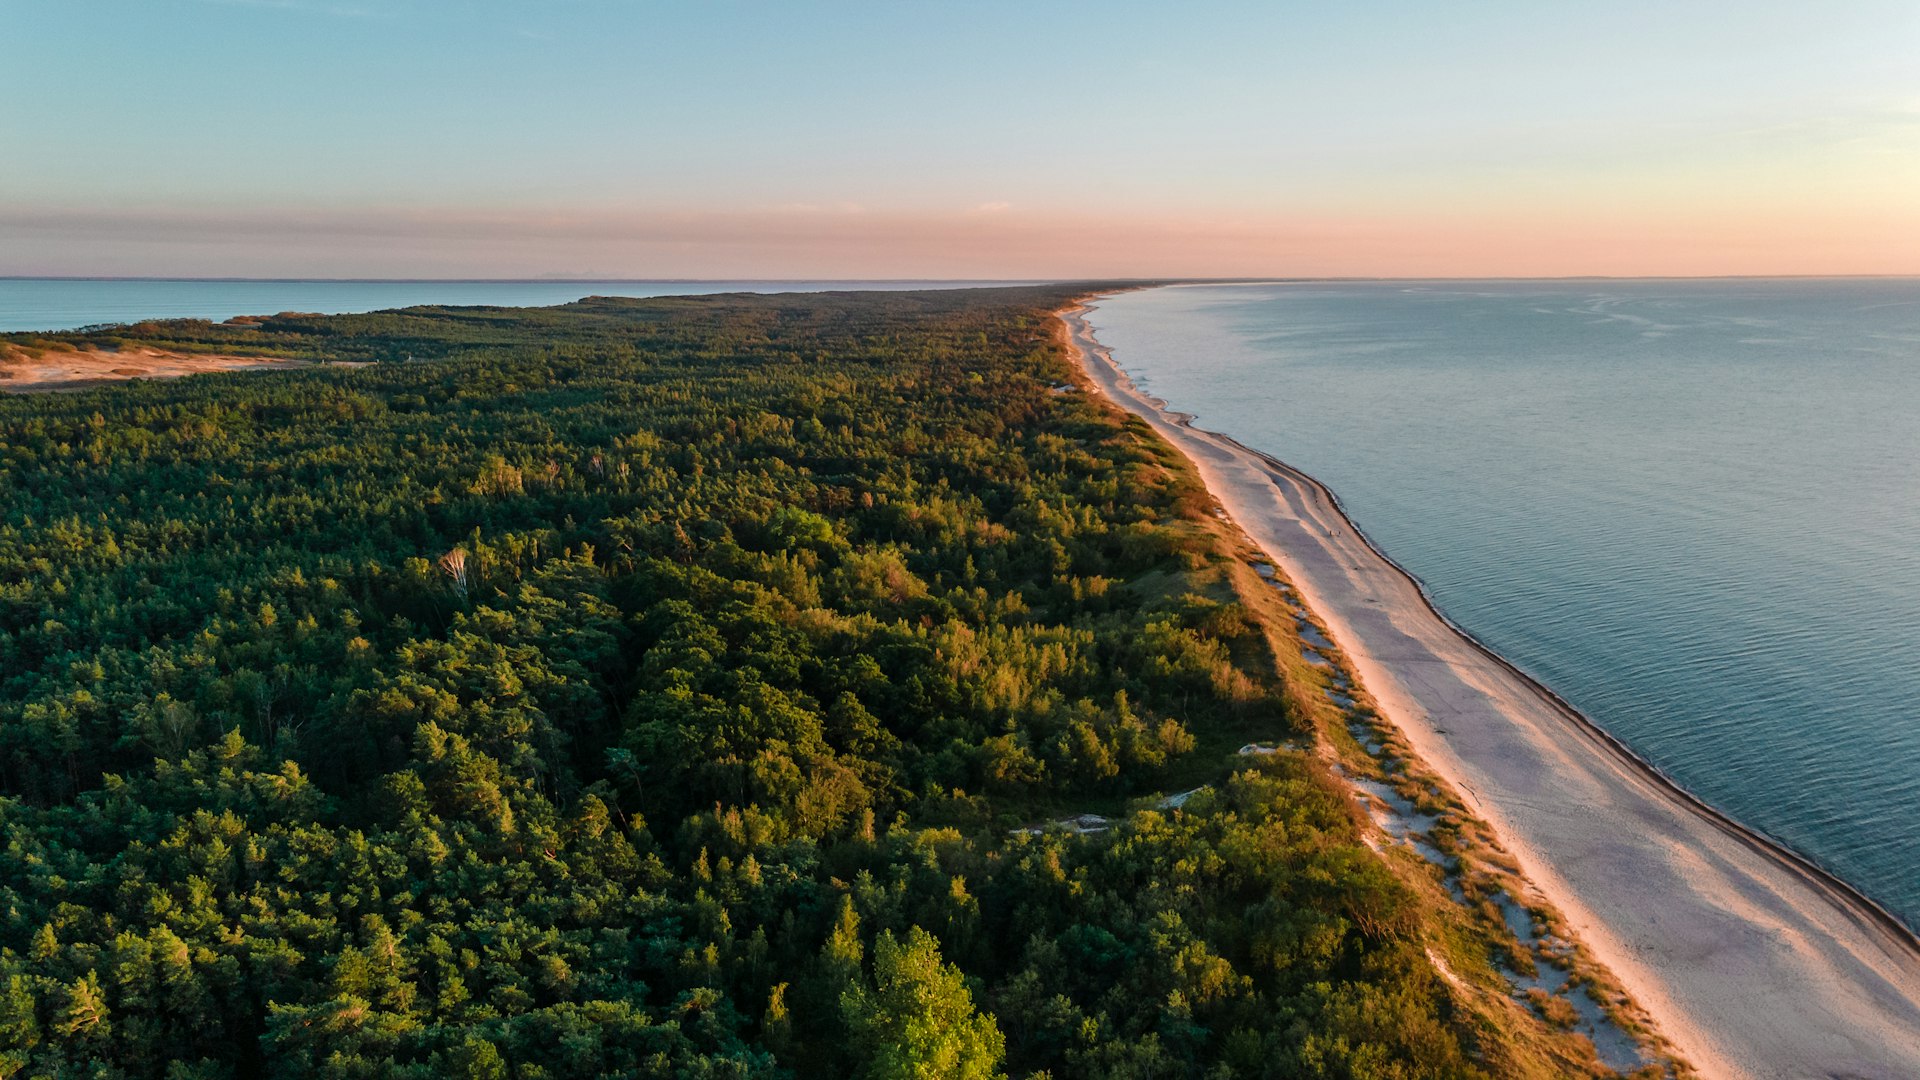 The Baltic sea with forest, beach and sea at sunset, Curonian Spit, Lithuania